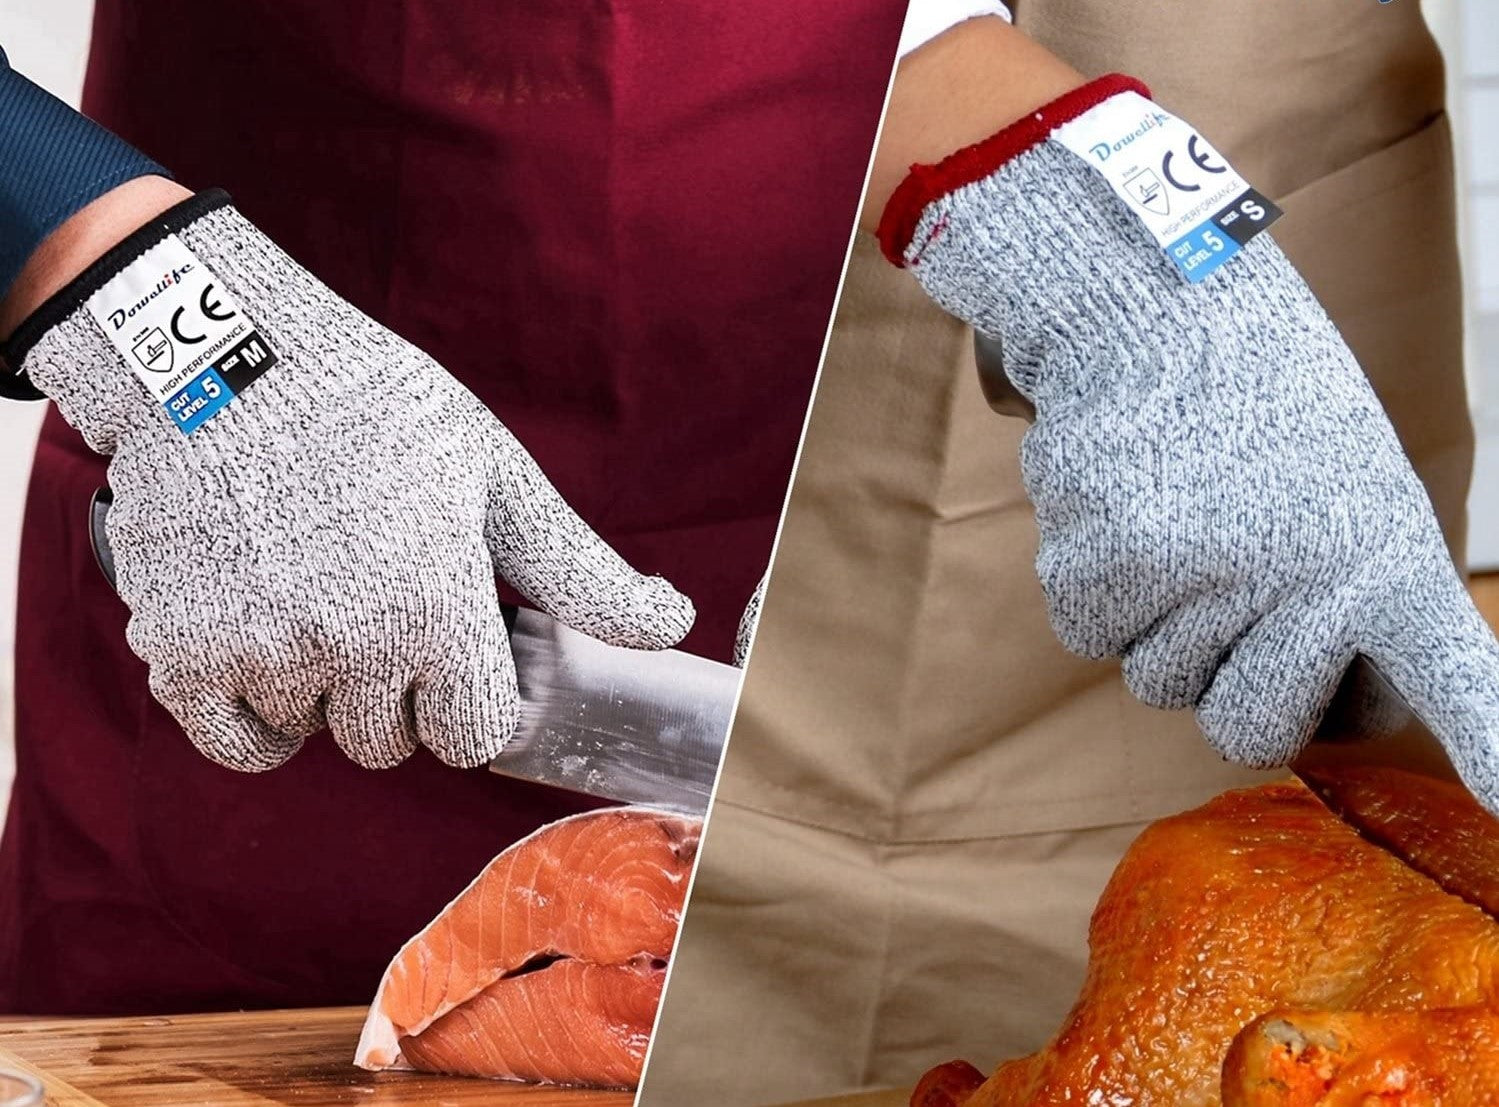 Side by side pictures of people cutting salmon and a turkey while wearing the gloves